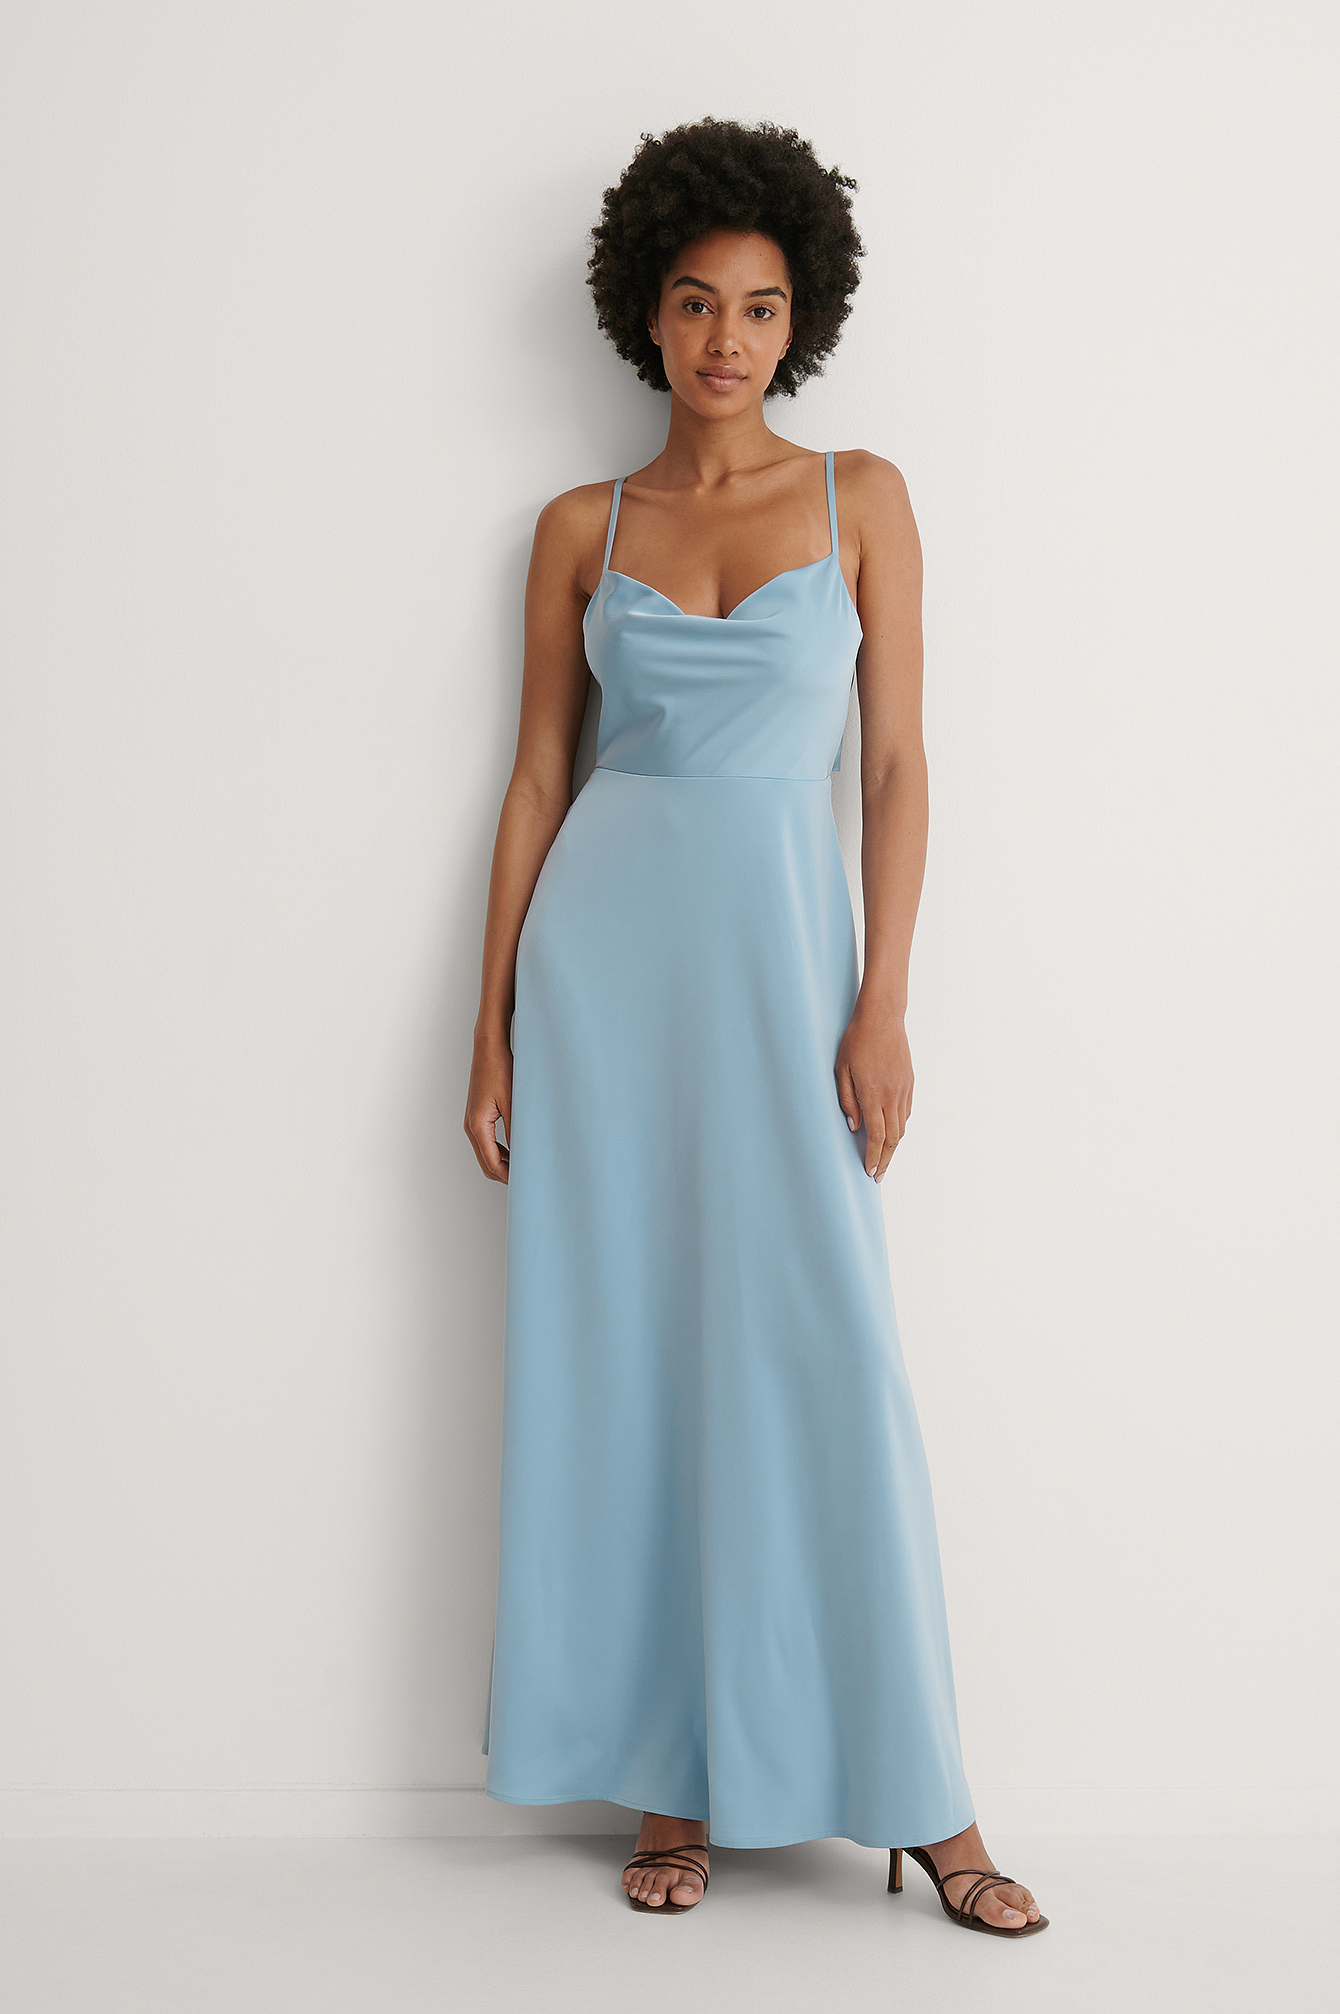 Waterfall Bow Maxi Dress Outfit